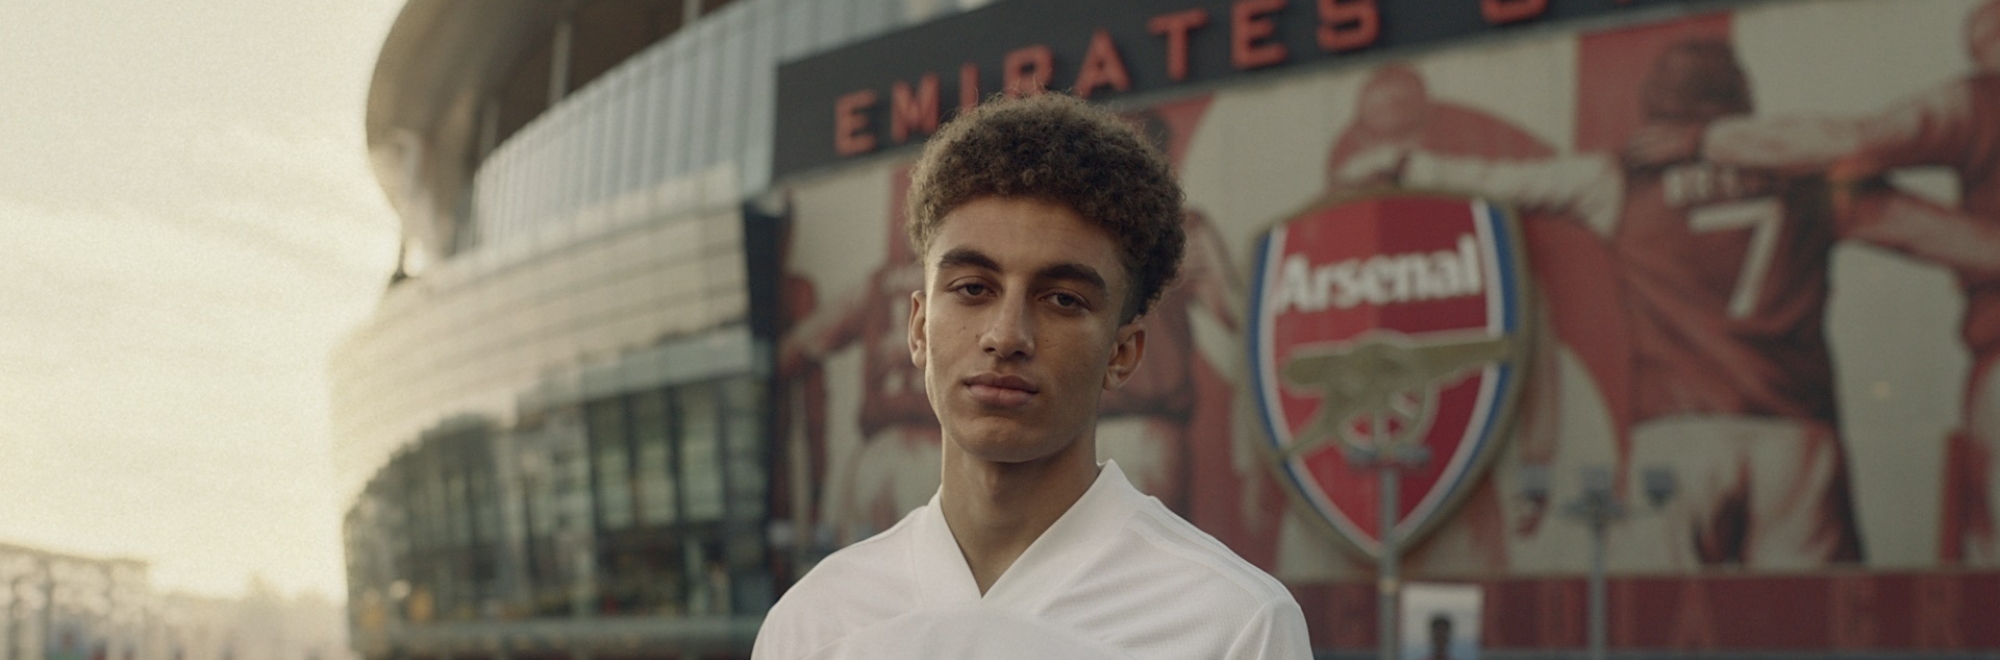 Arsenal's No More Red campaign continues the ongoing fight against knife crime